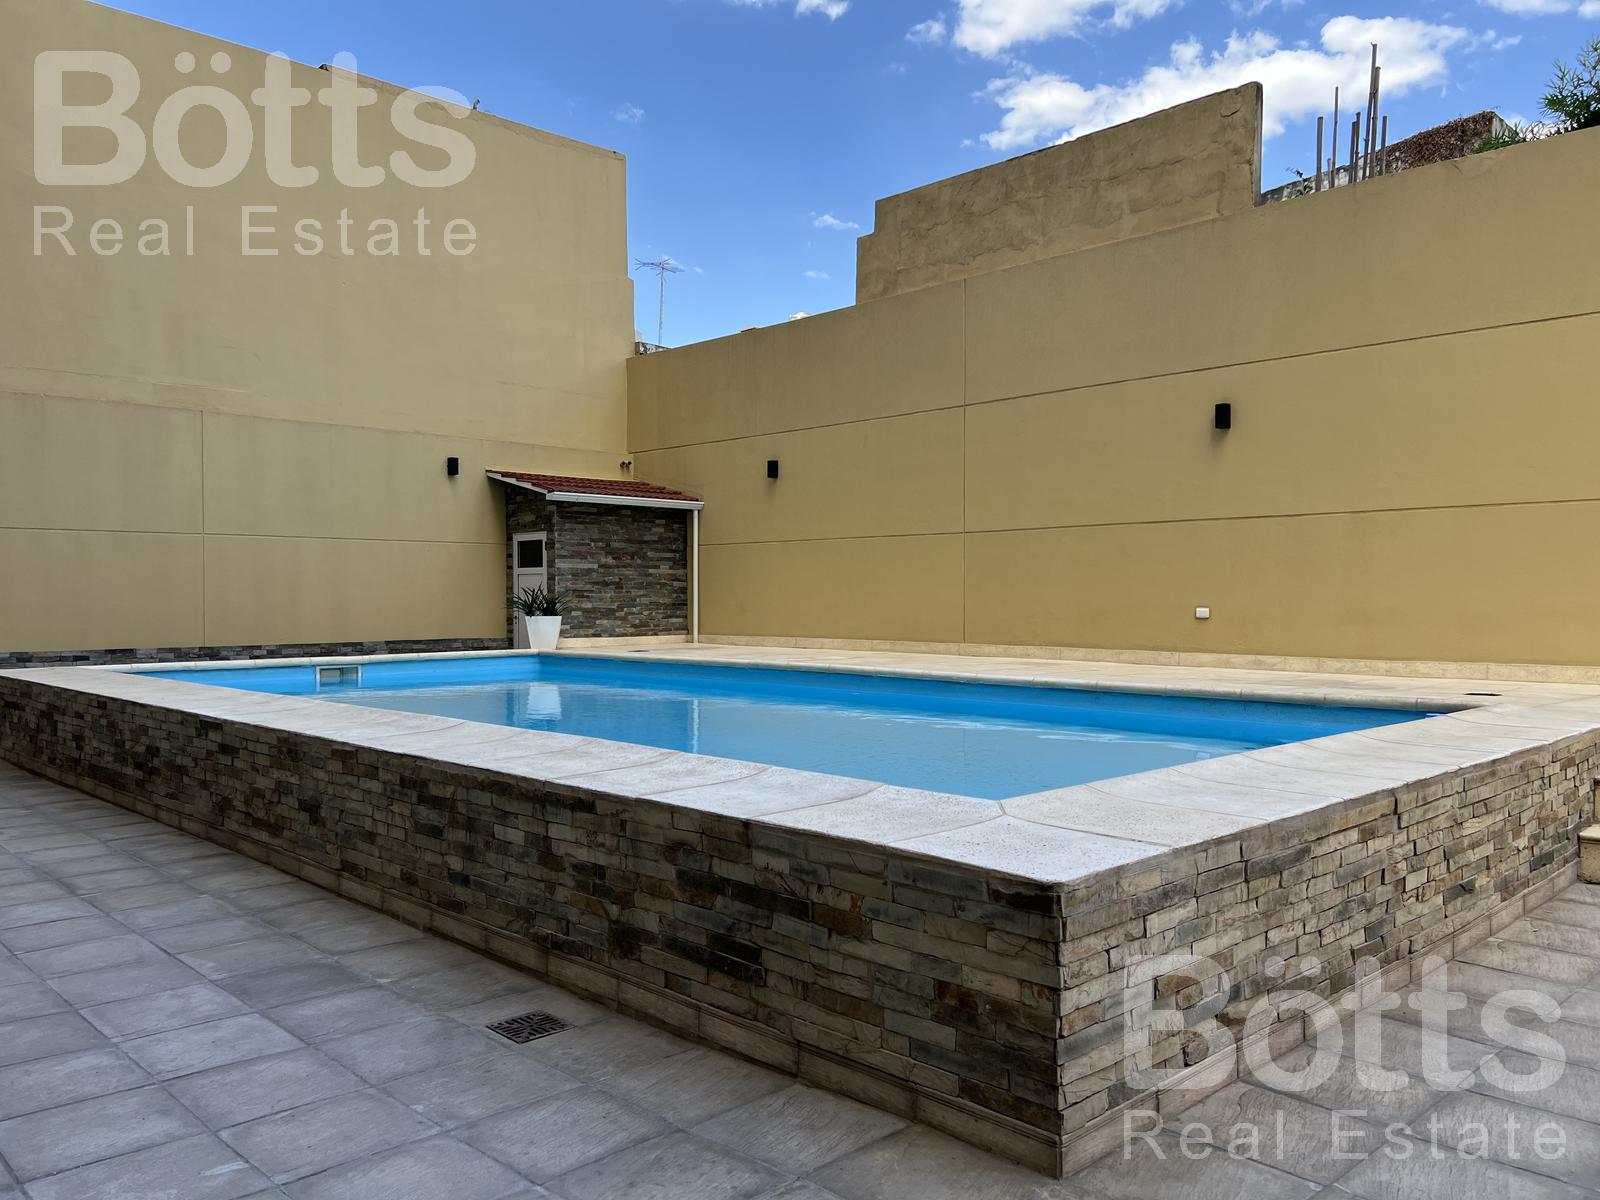 #5090806 | Rental | Apartment | Parque Chass (Bötts Real Estate)